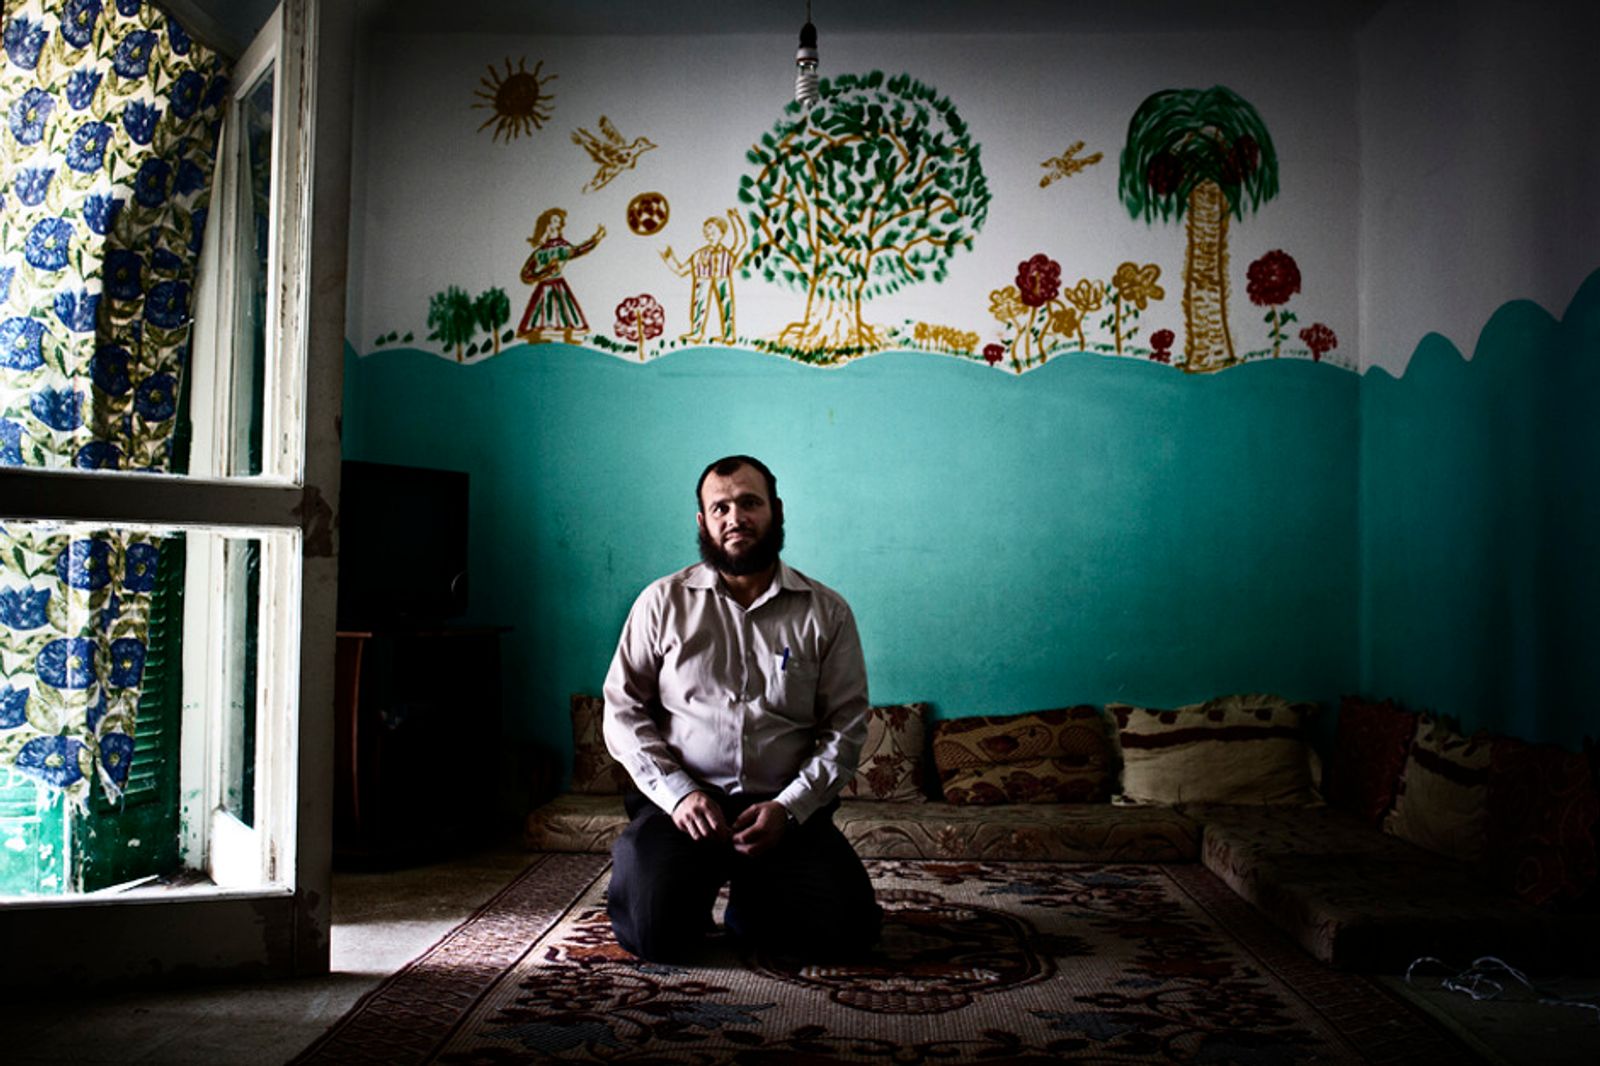 © Manel Quiros - Image from the 'SIXTH OF OCTOBER': The Refugees of Syria photography project